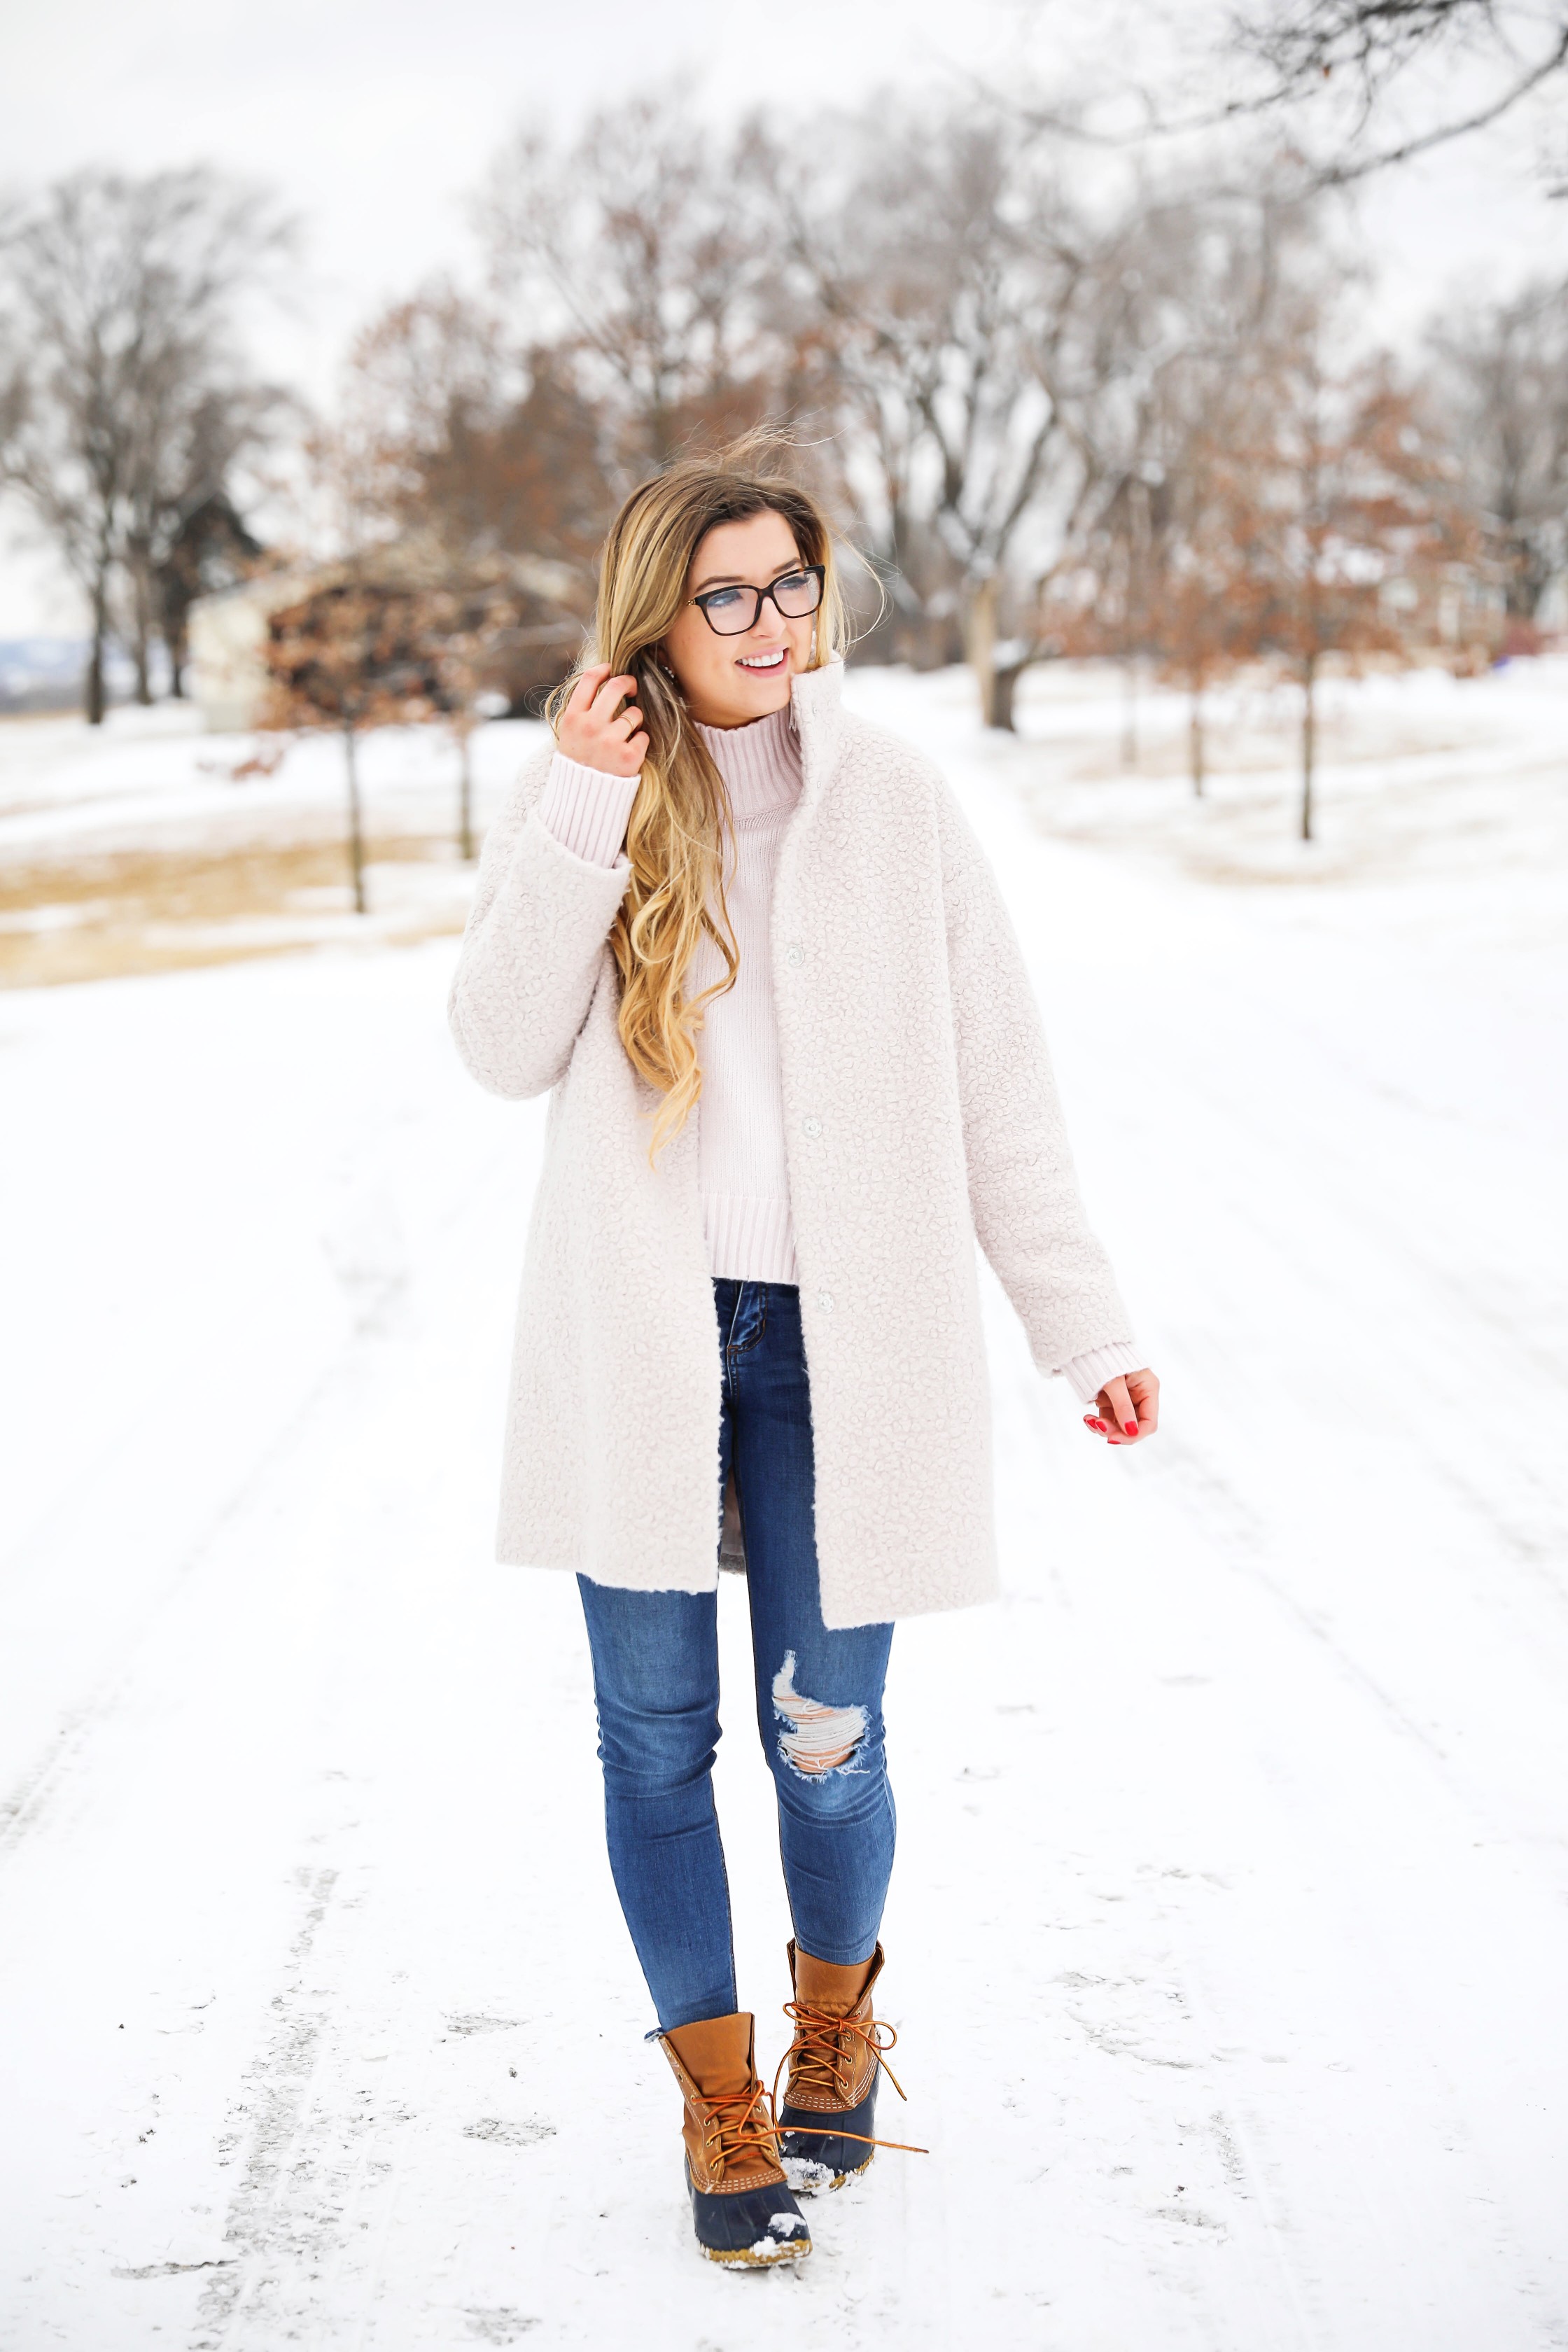 Nice winter coat! Winter coat roundup on the blog! I love this pink coat, it is sort of off white looking! Details on fashion blog daily dose of charm by lauren lindmark